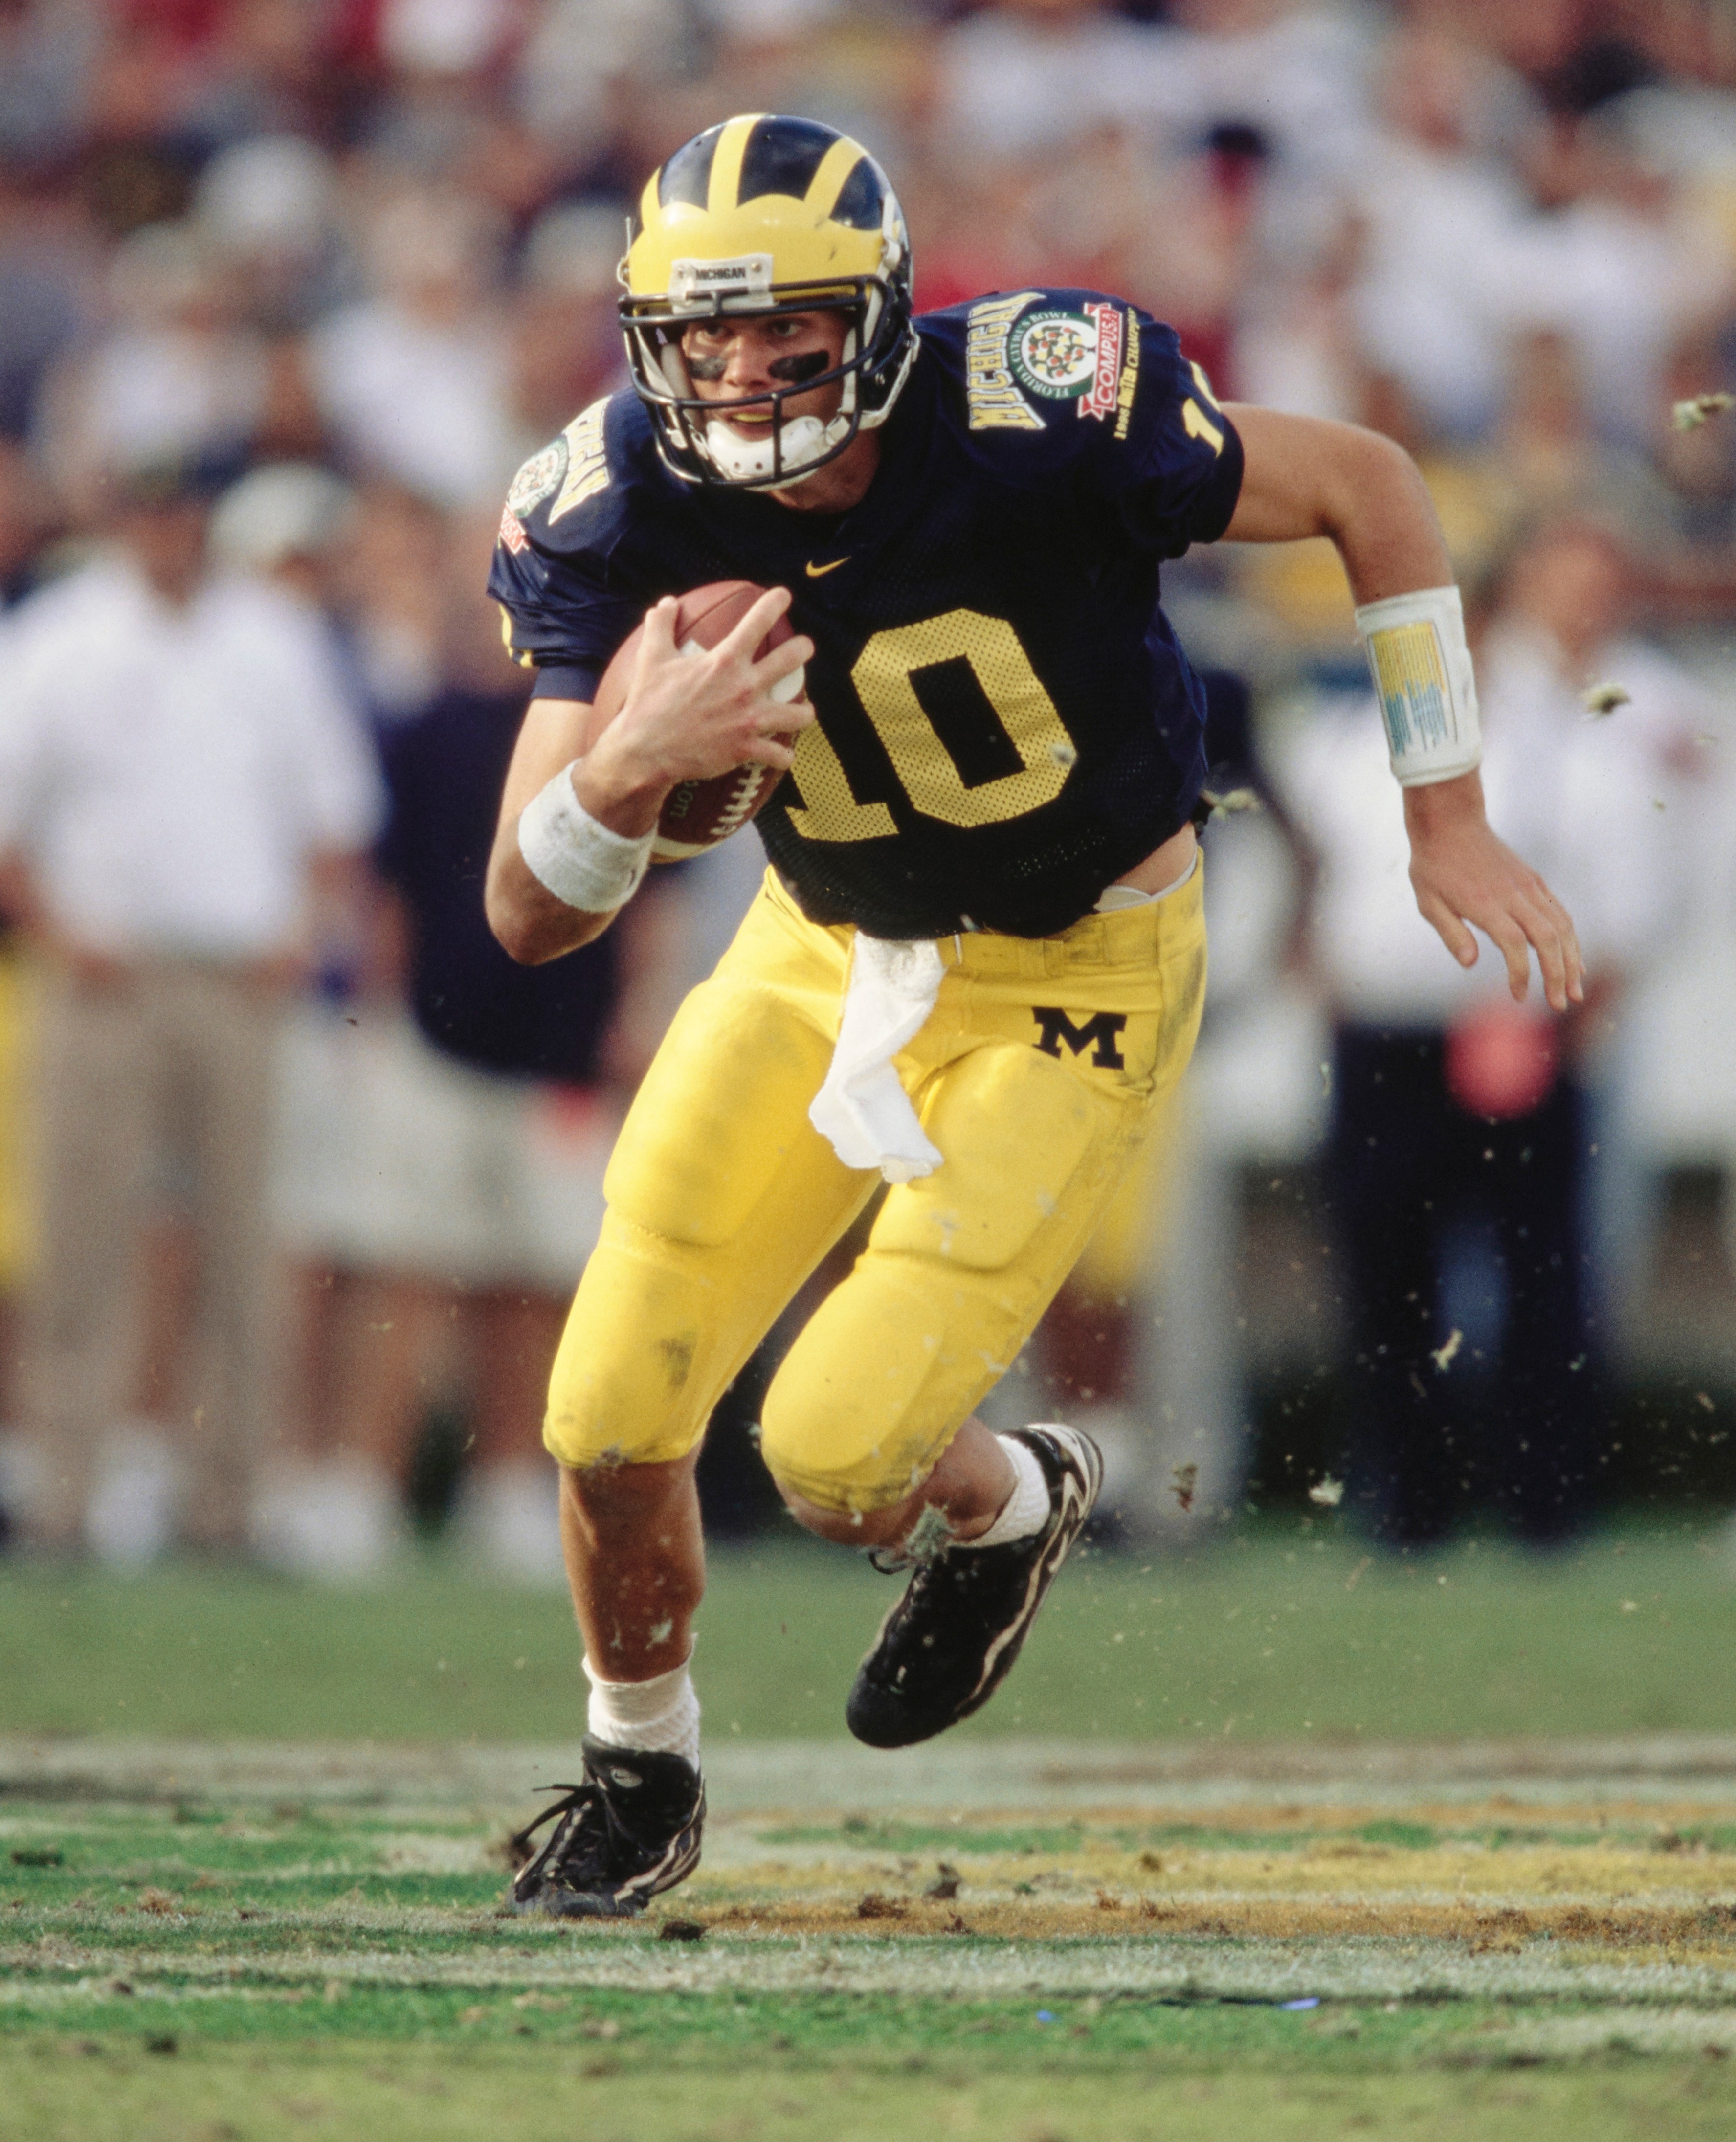 Tom Brady during his college days leading Michigan to a Citrus Bowl win in 1999